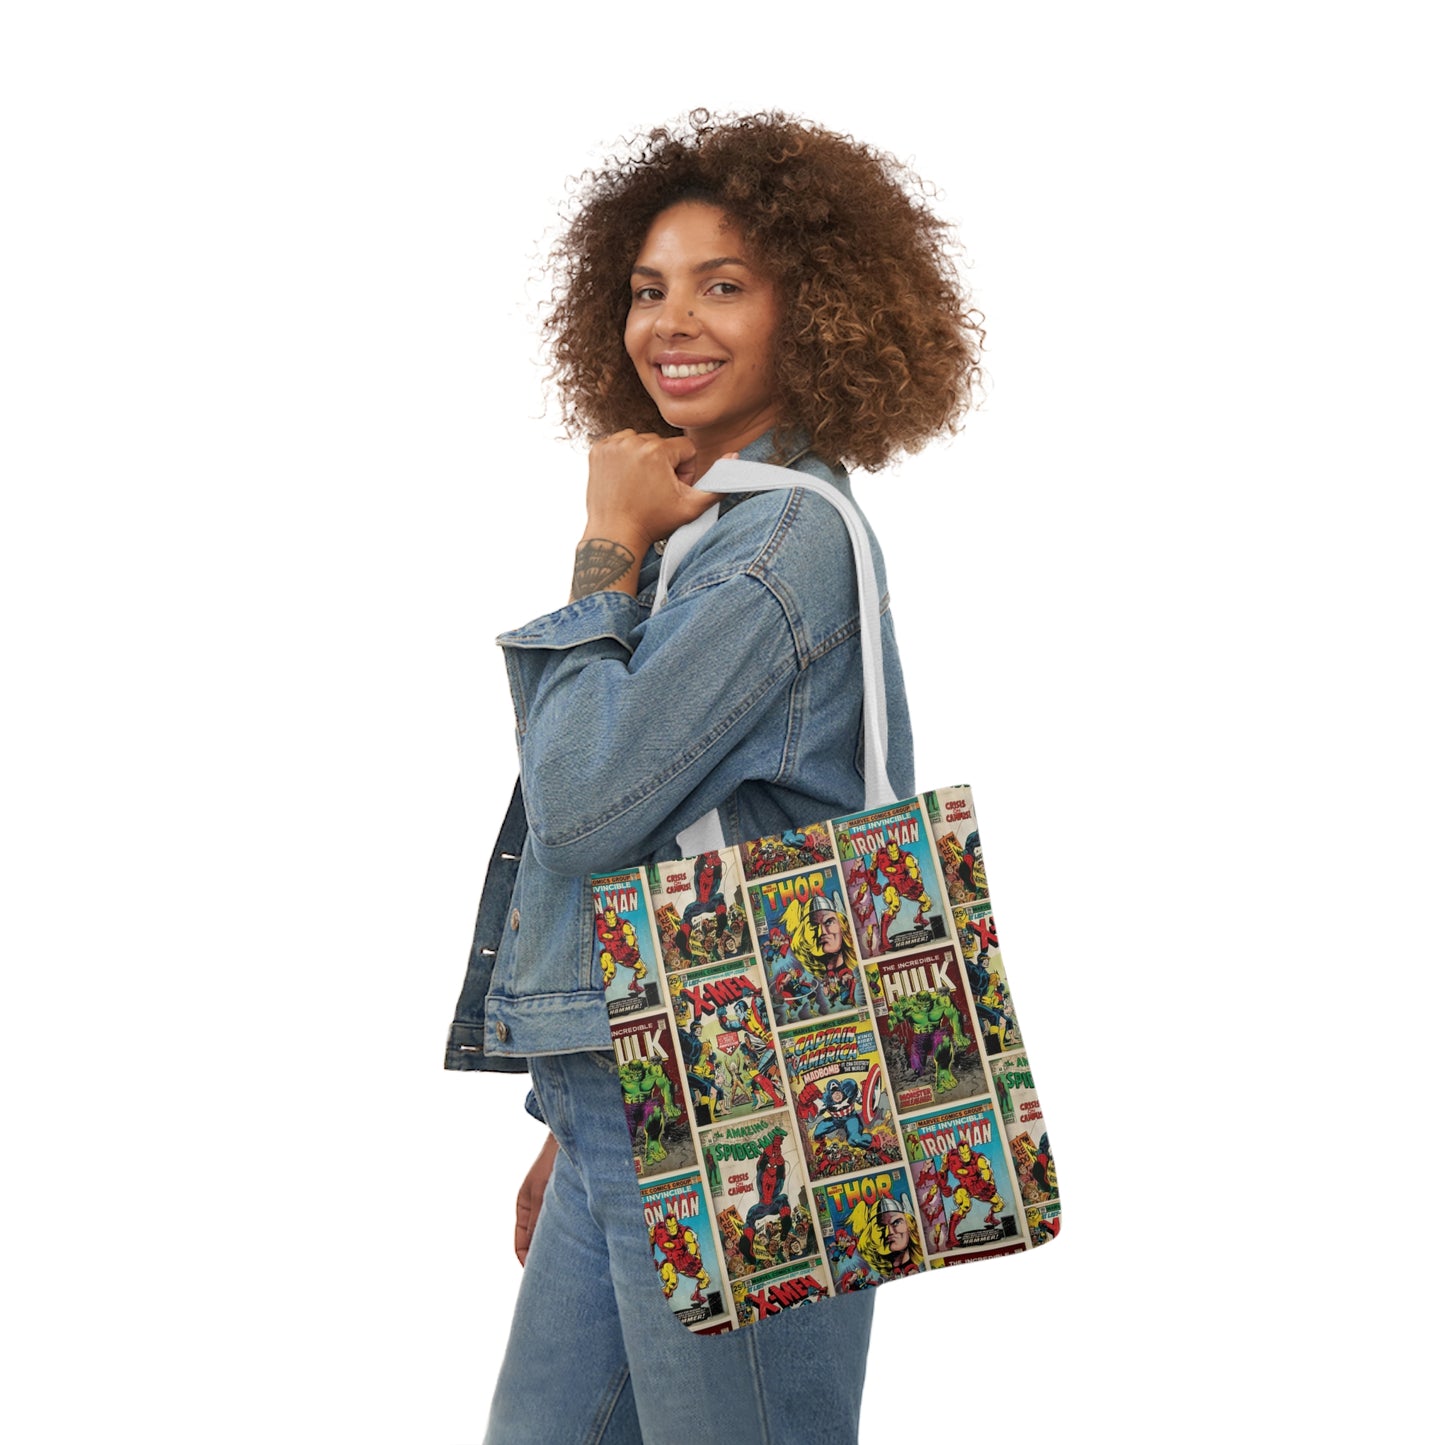 Marvel Comic Book Cover Collage Polyester Canvas Tote Bag